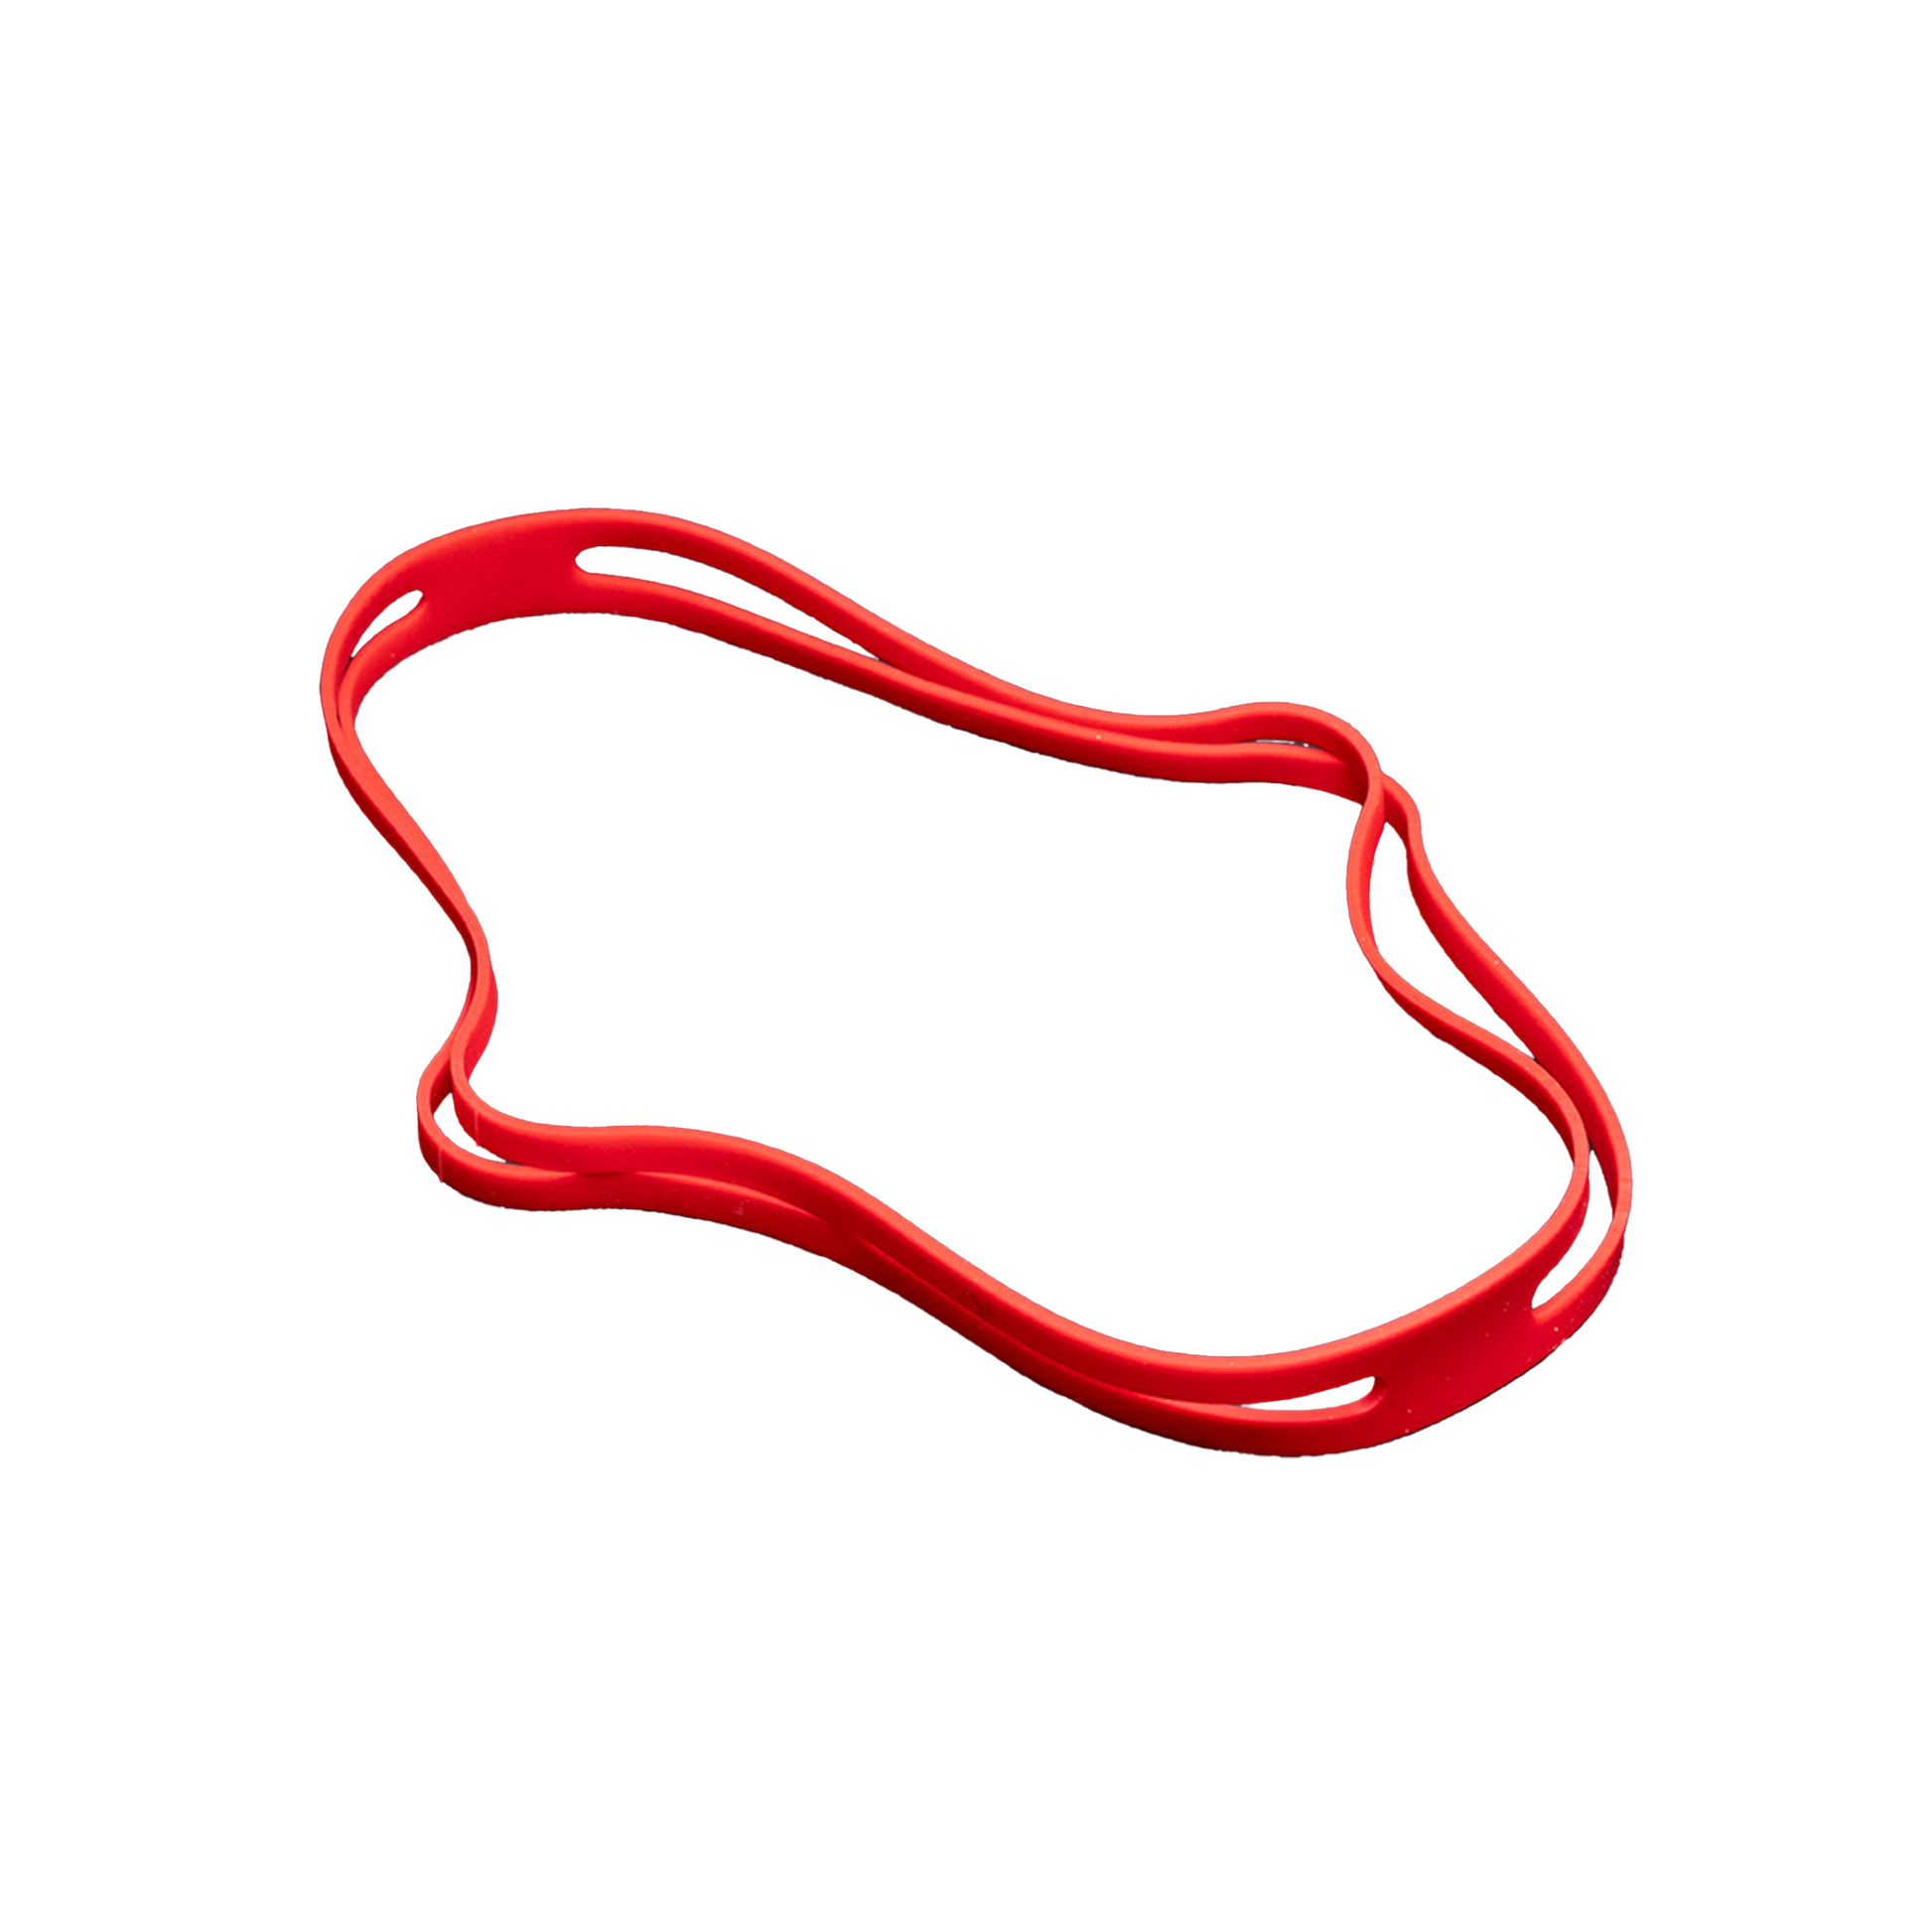 Isolated image of the MycoMultiplier™, a red elastic band for optimizing mushroom growth in grow kits.